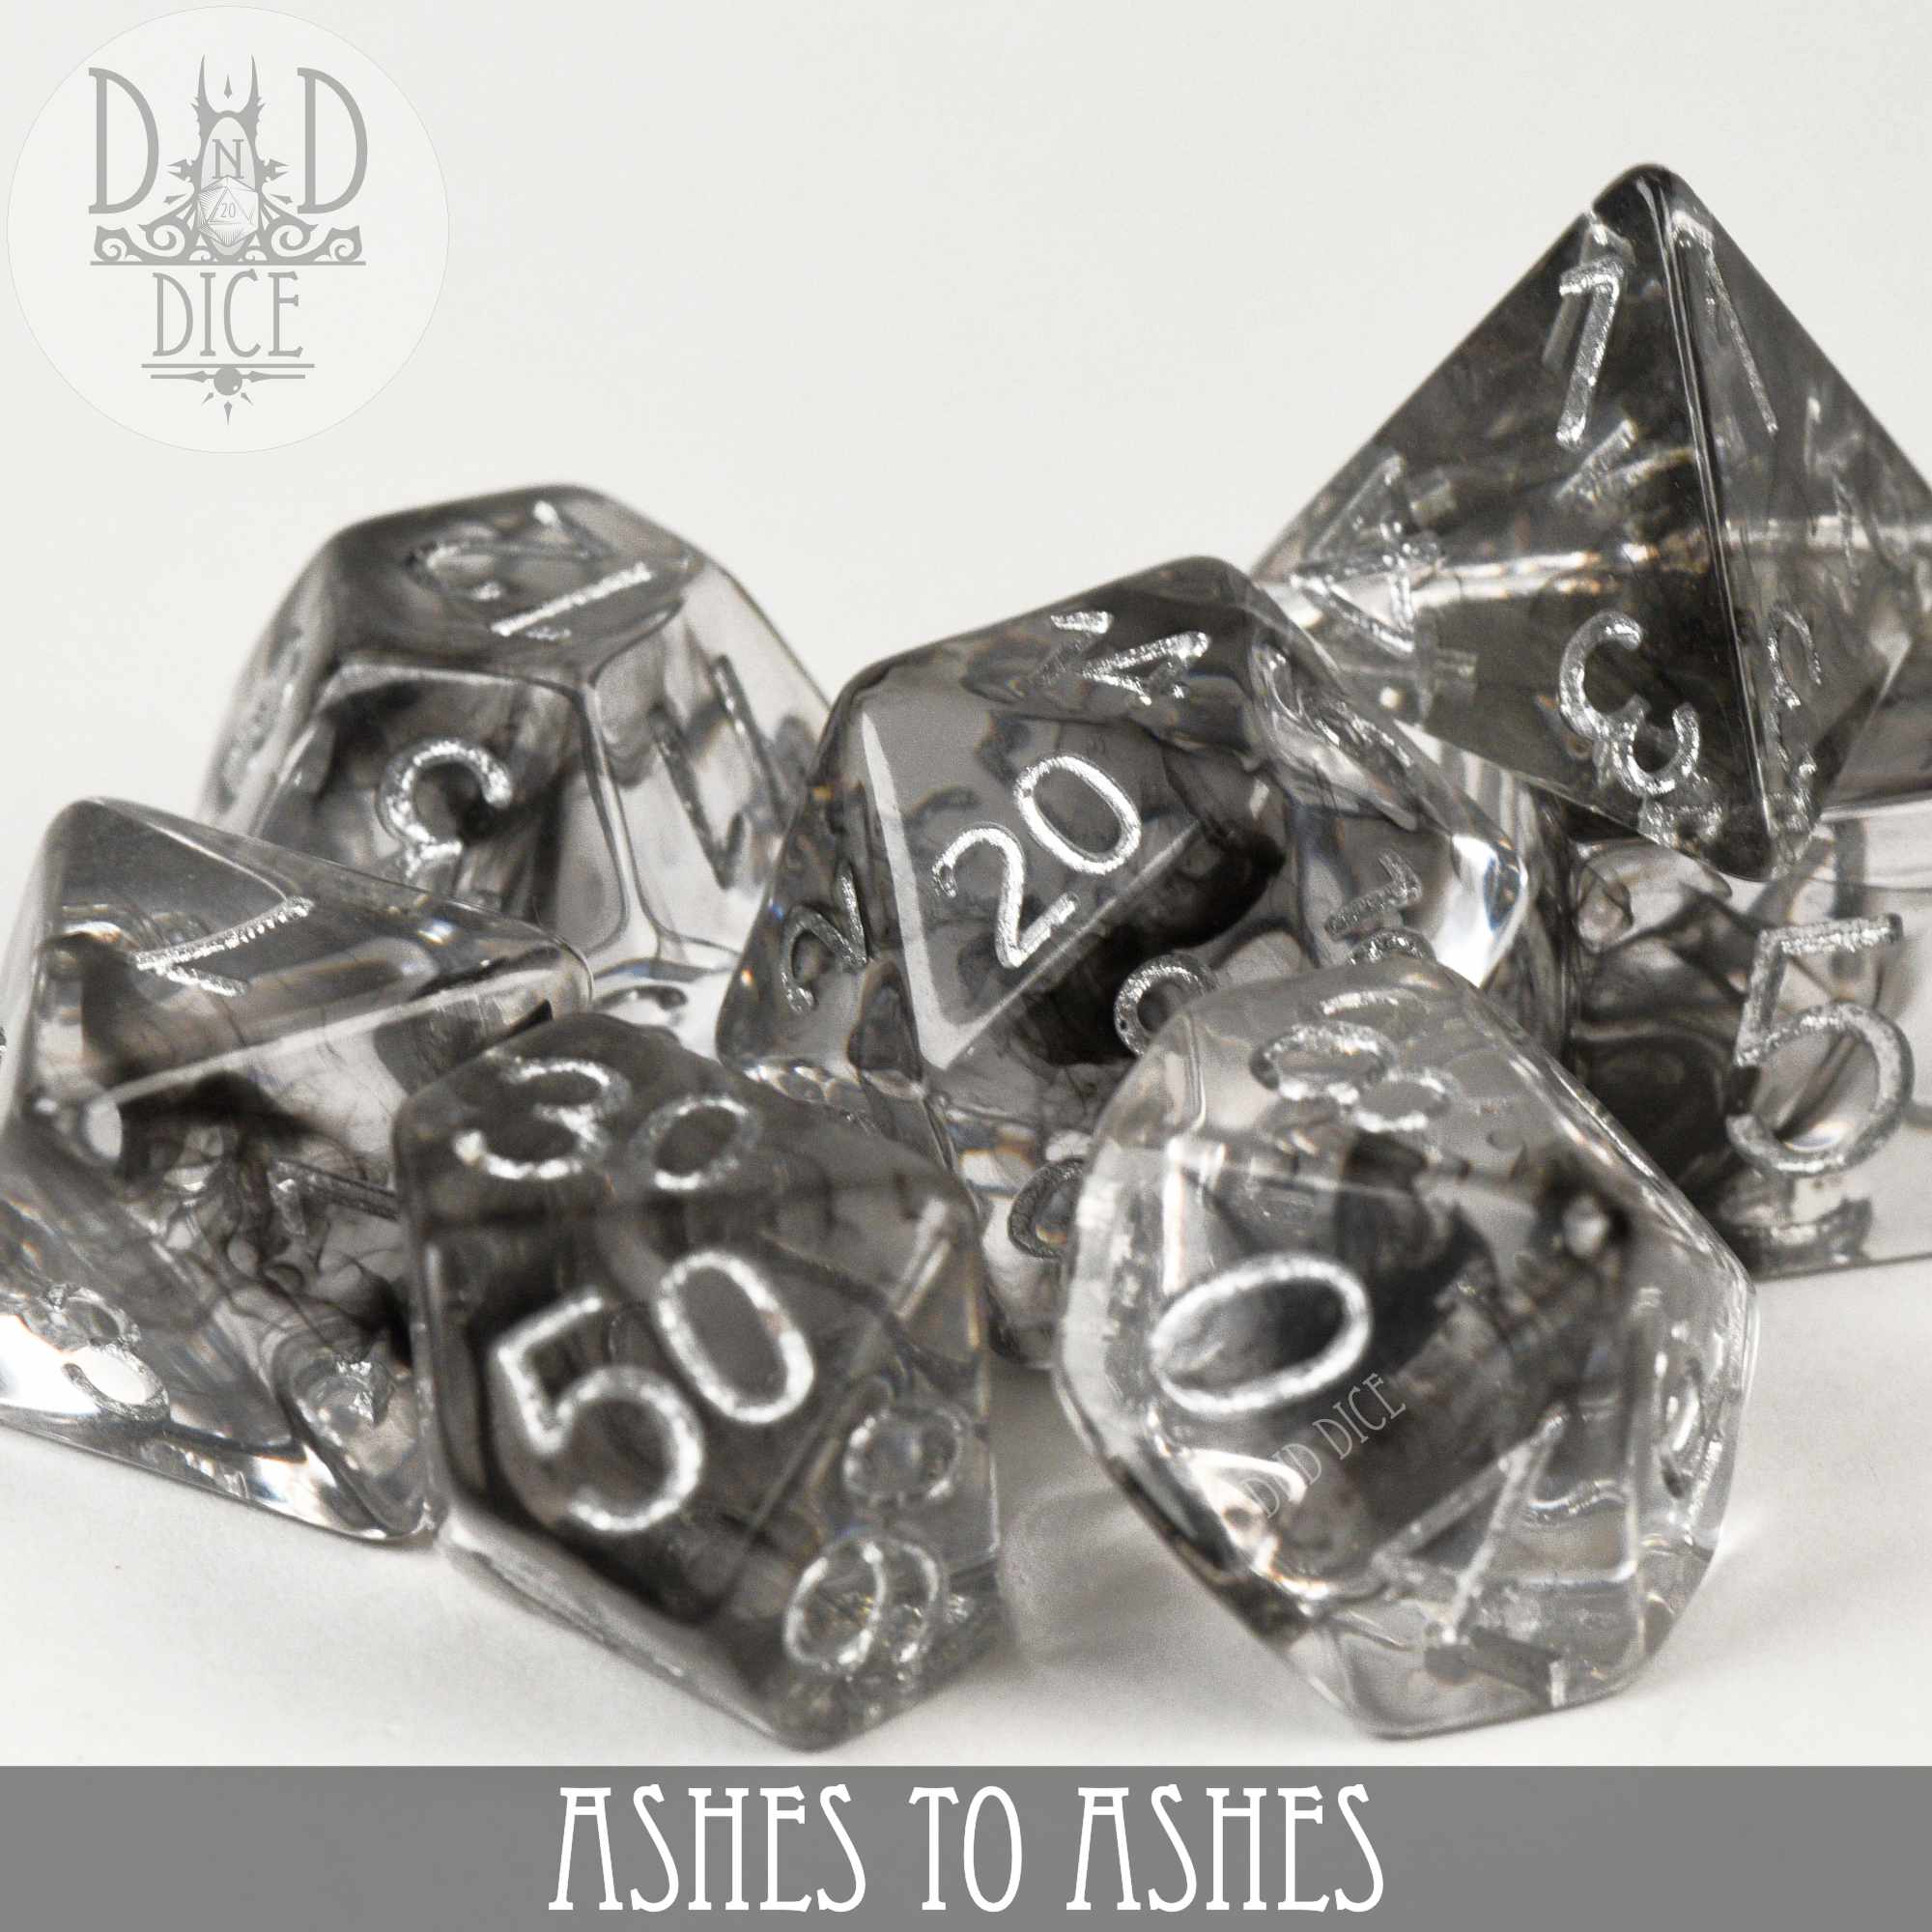 Ashes to Ashes Dice Set